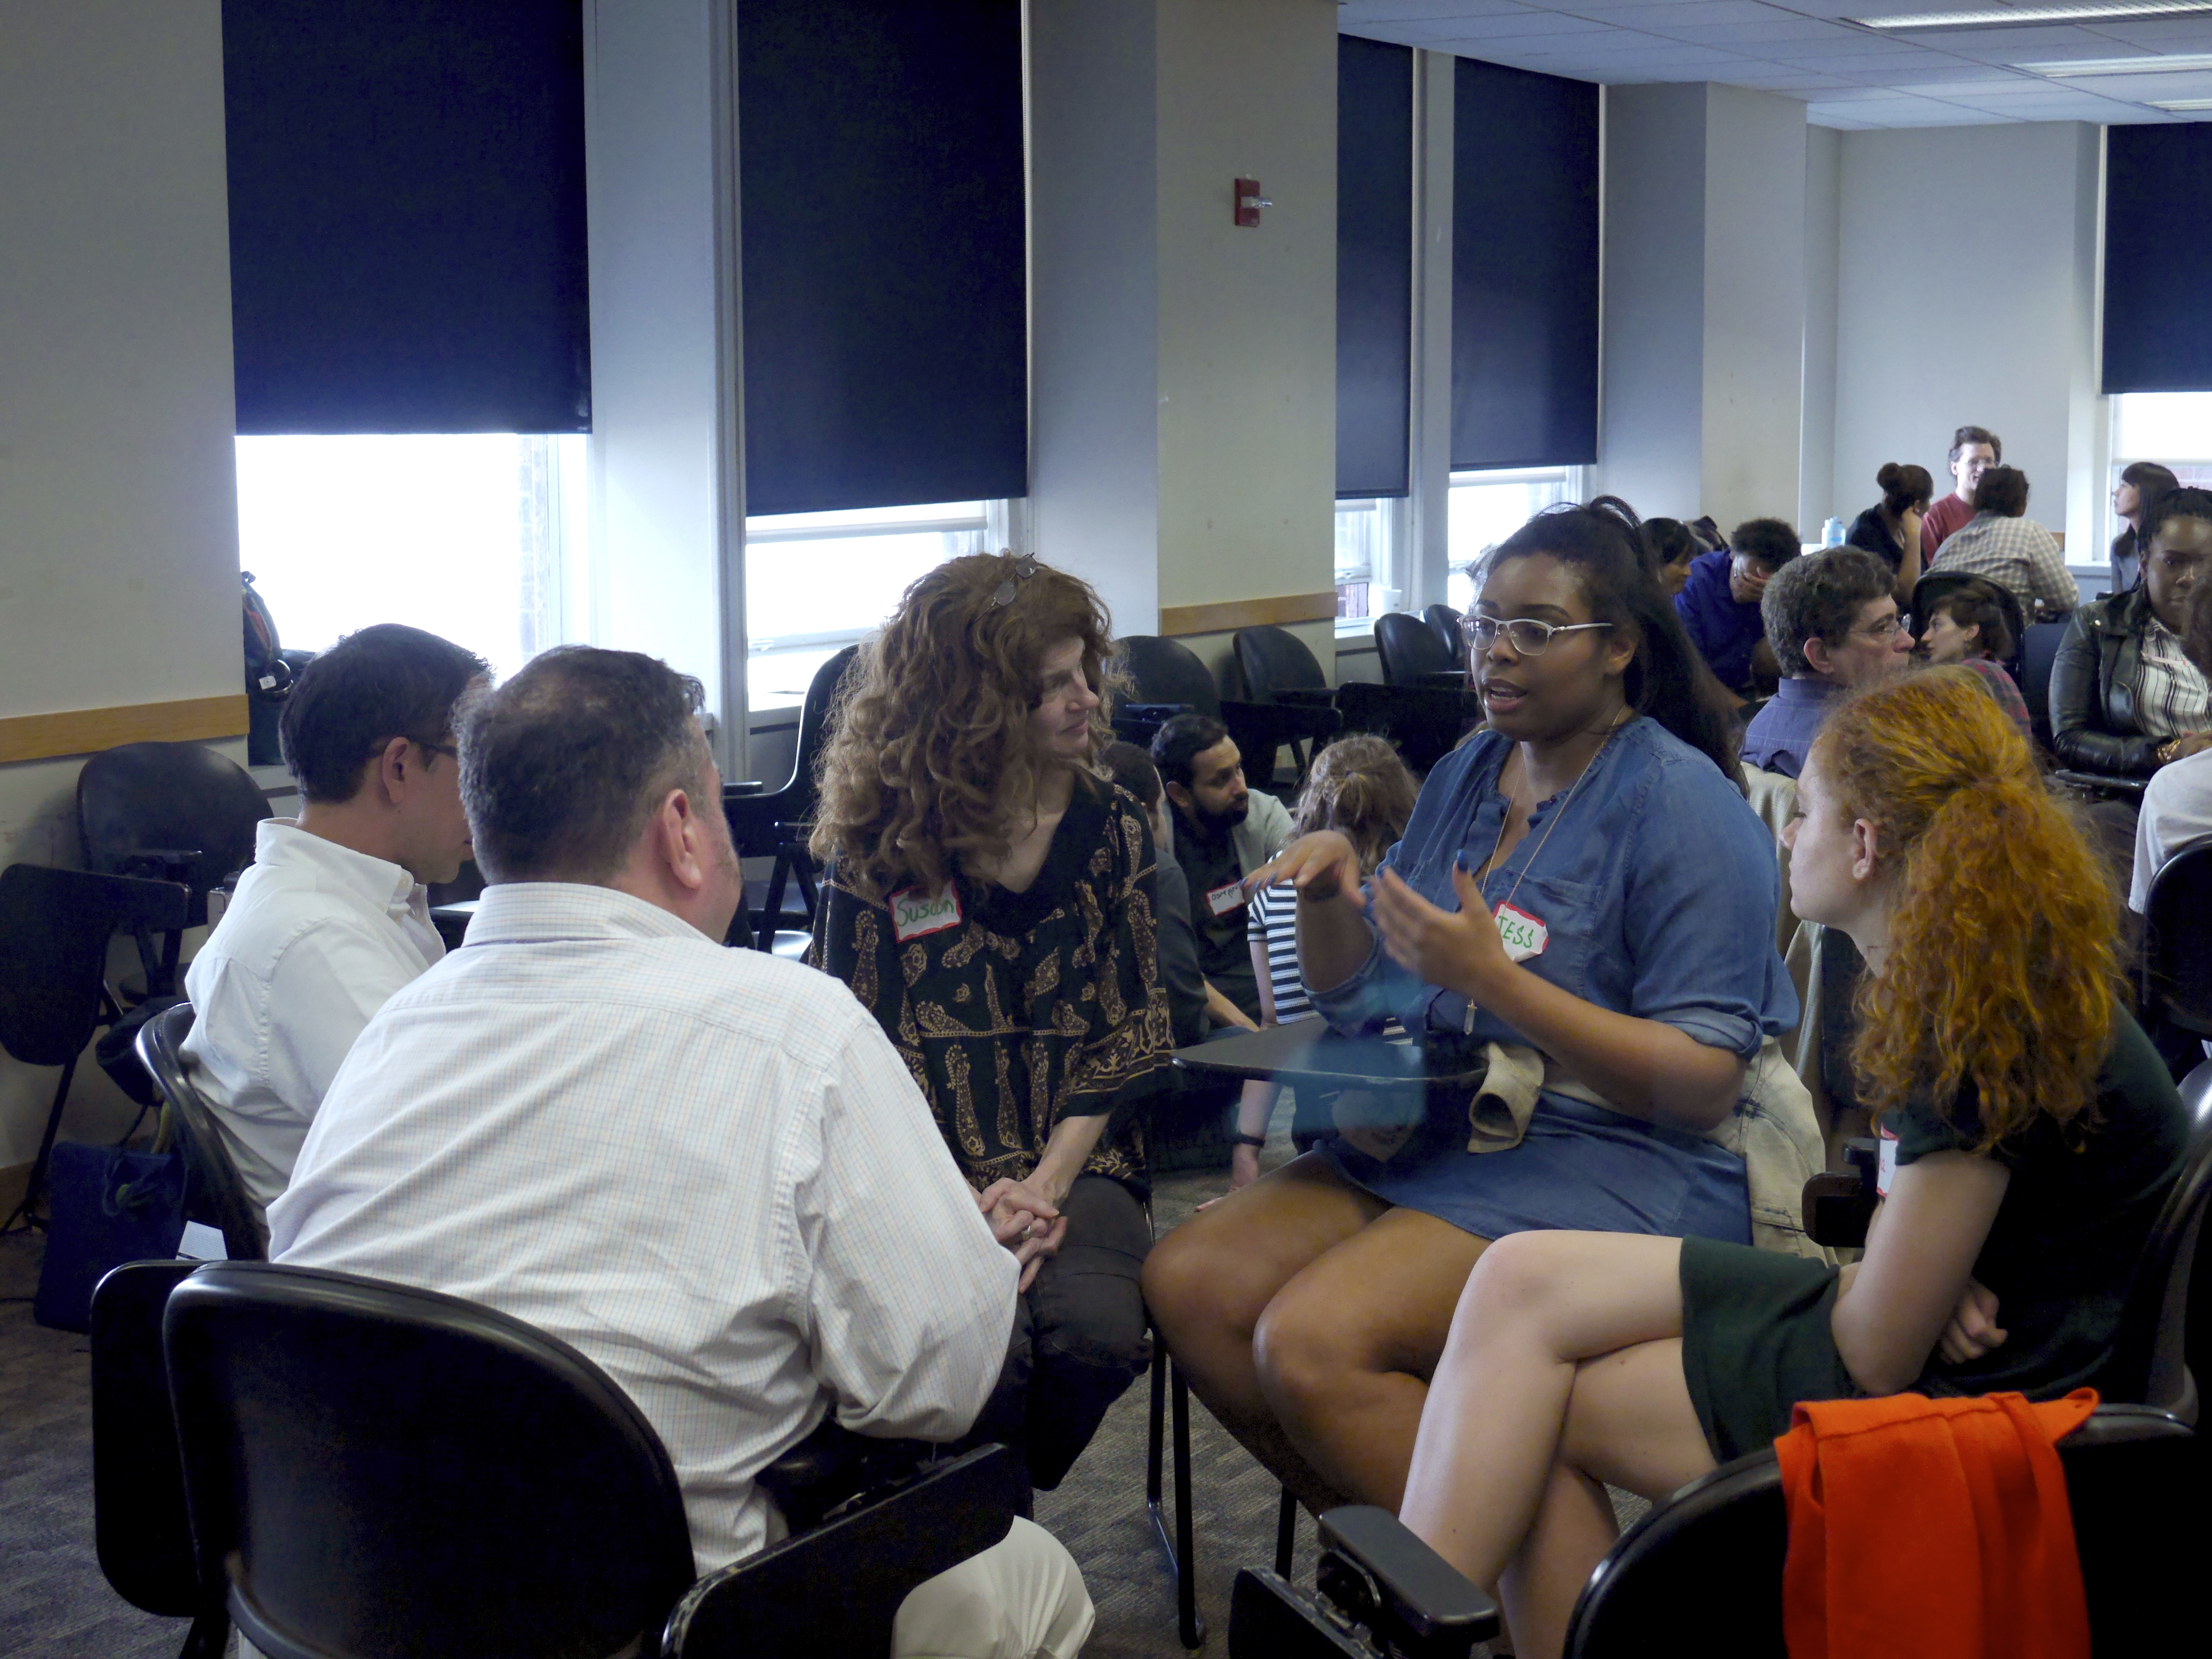  Participants in one of the NYC Convening’s many workshops, entitled Building Unity to Create Indigenous, Racial, and Immigrant Justice, spoke about their individual experiences and visions for a more inclusive system. (Photo: Michelle Stearn)